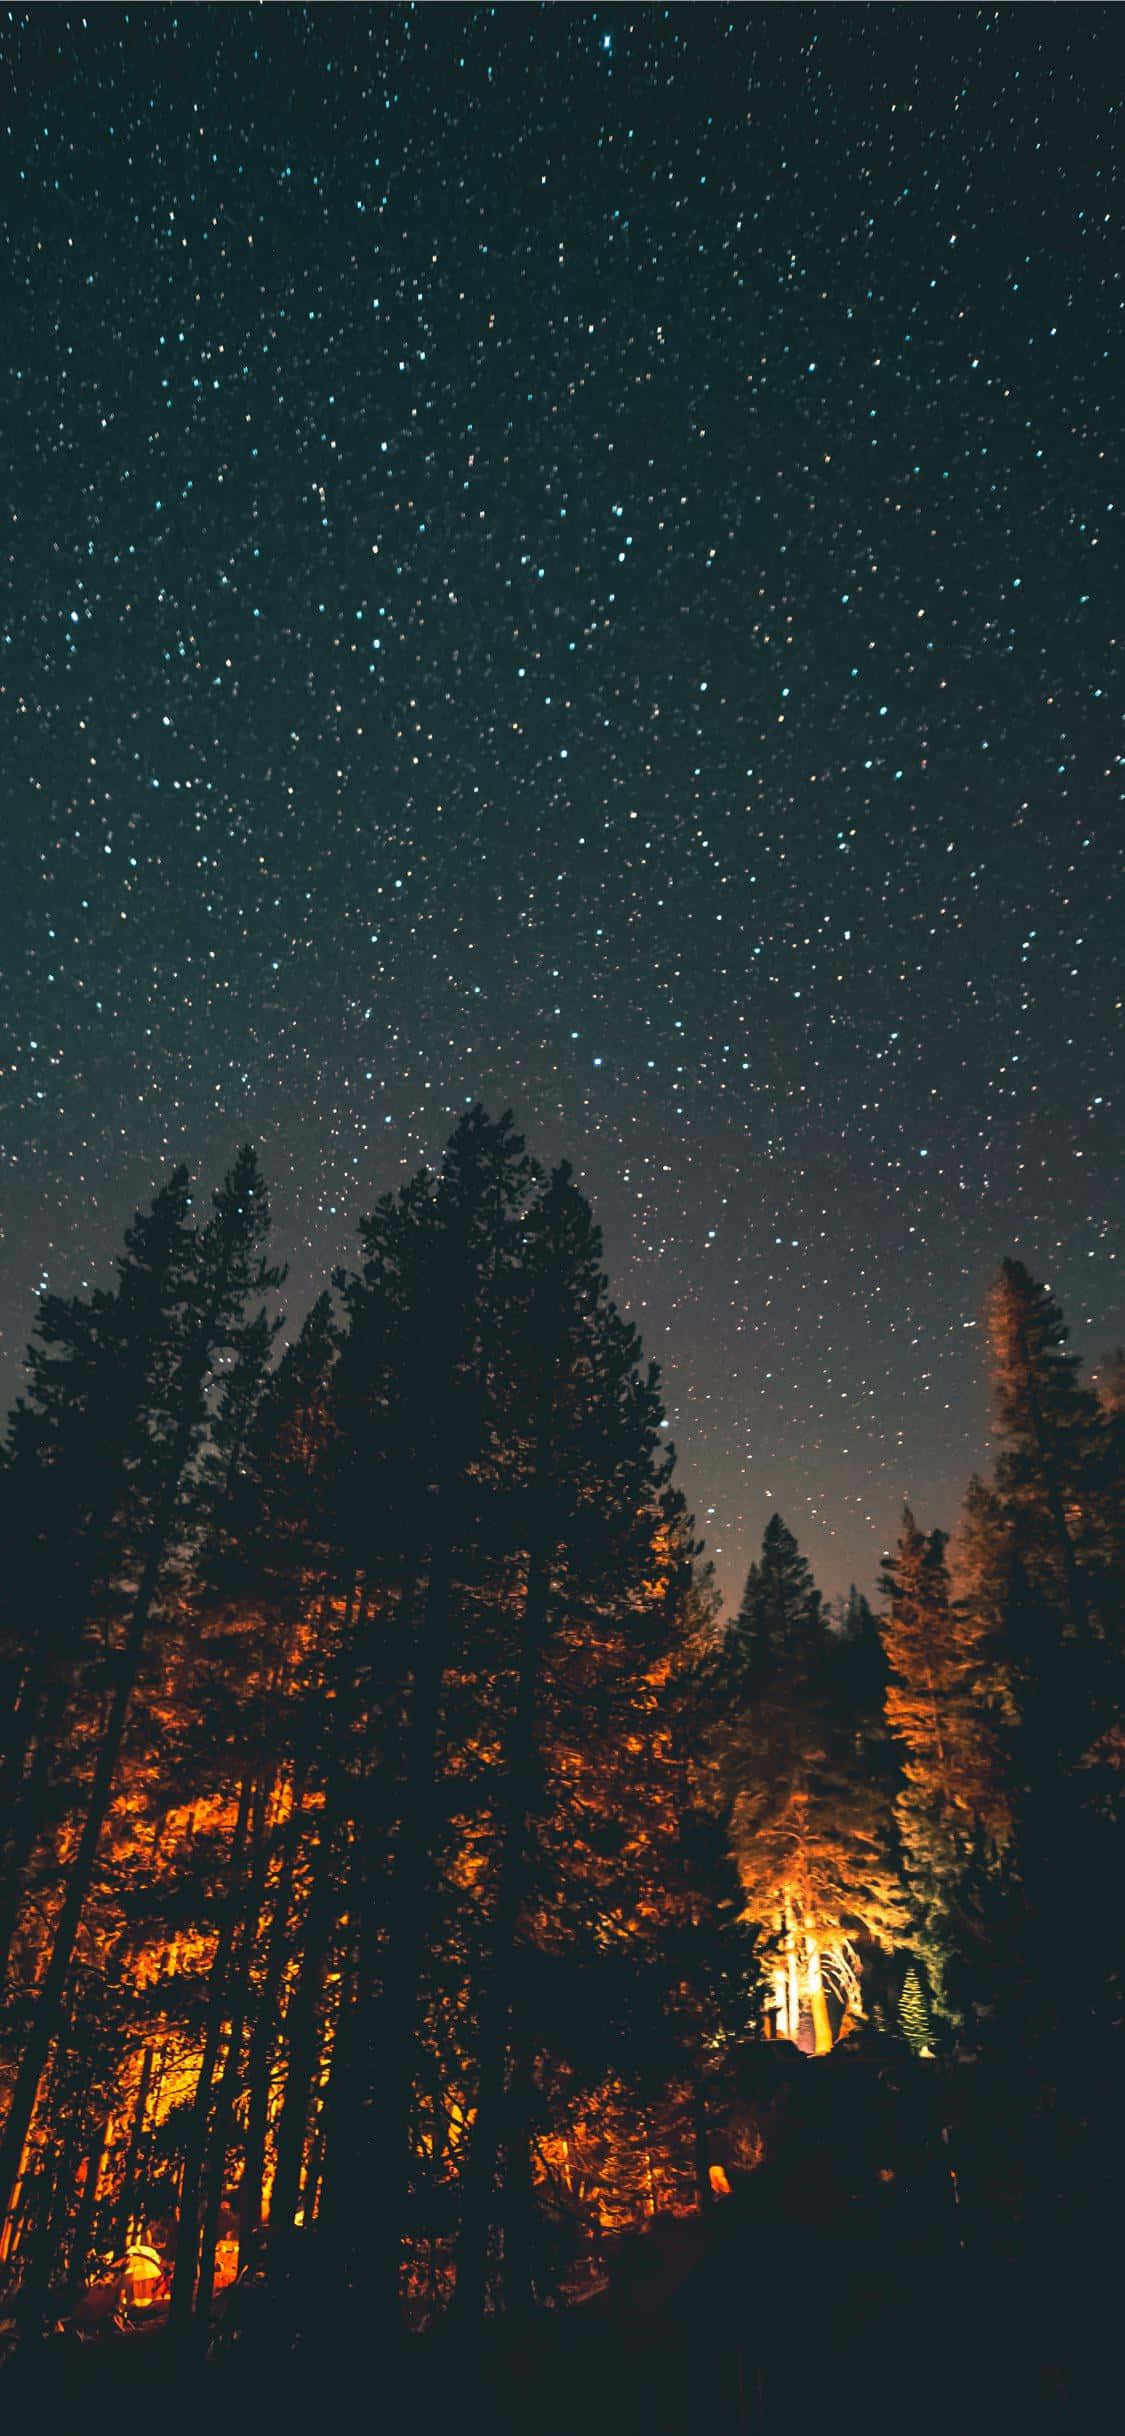 A Night Sky With Stars Above A Forest